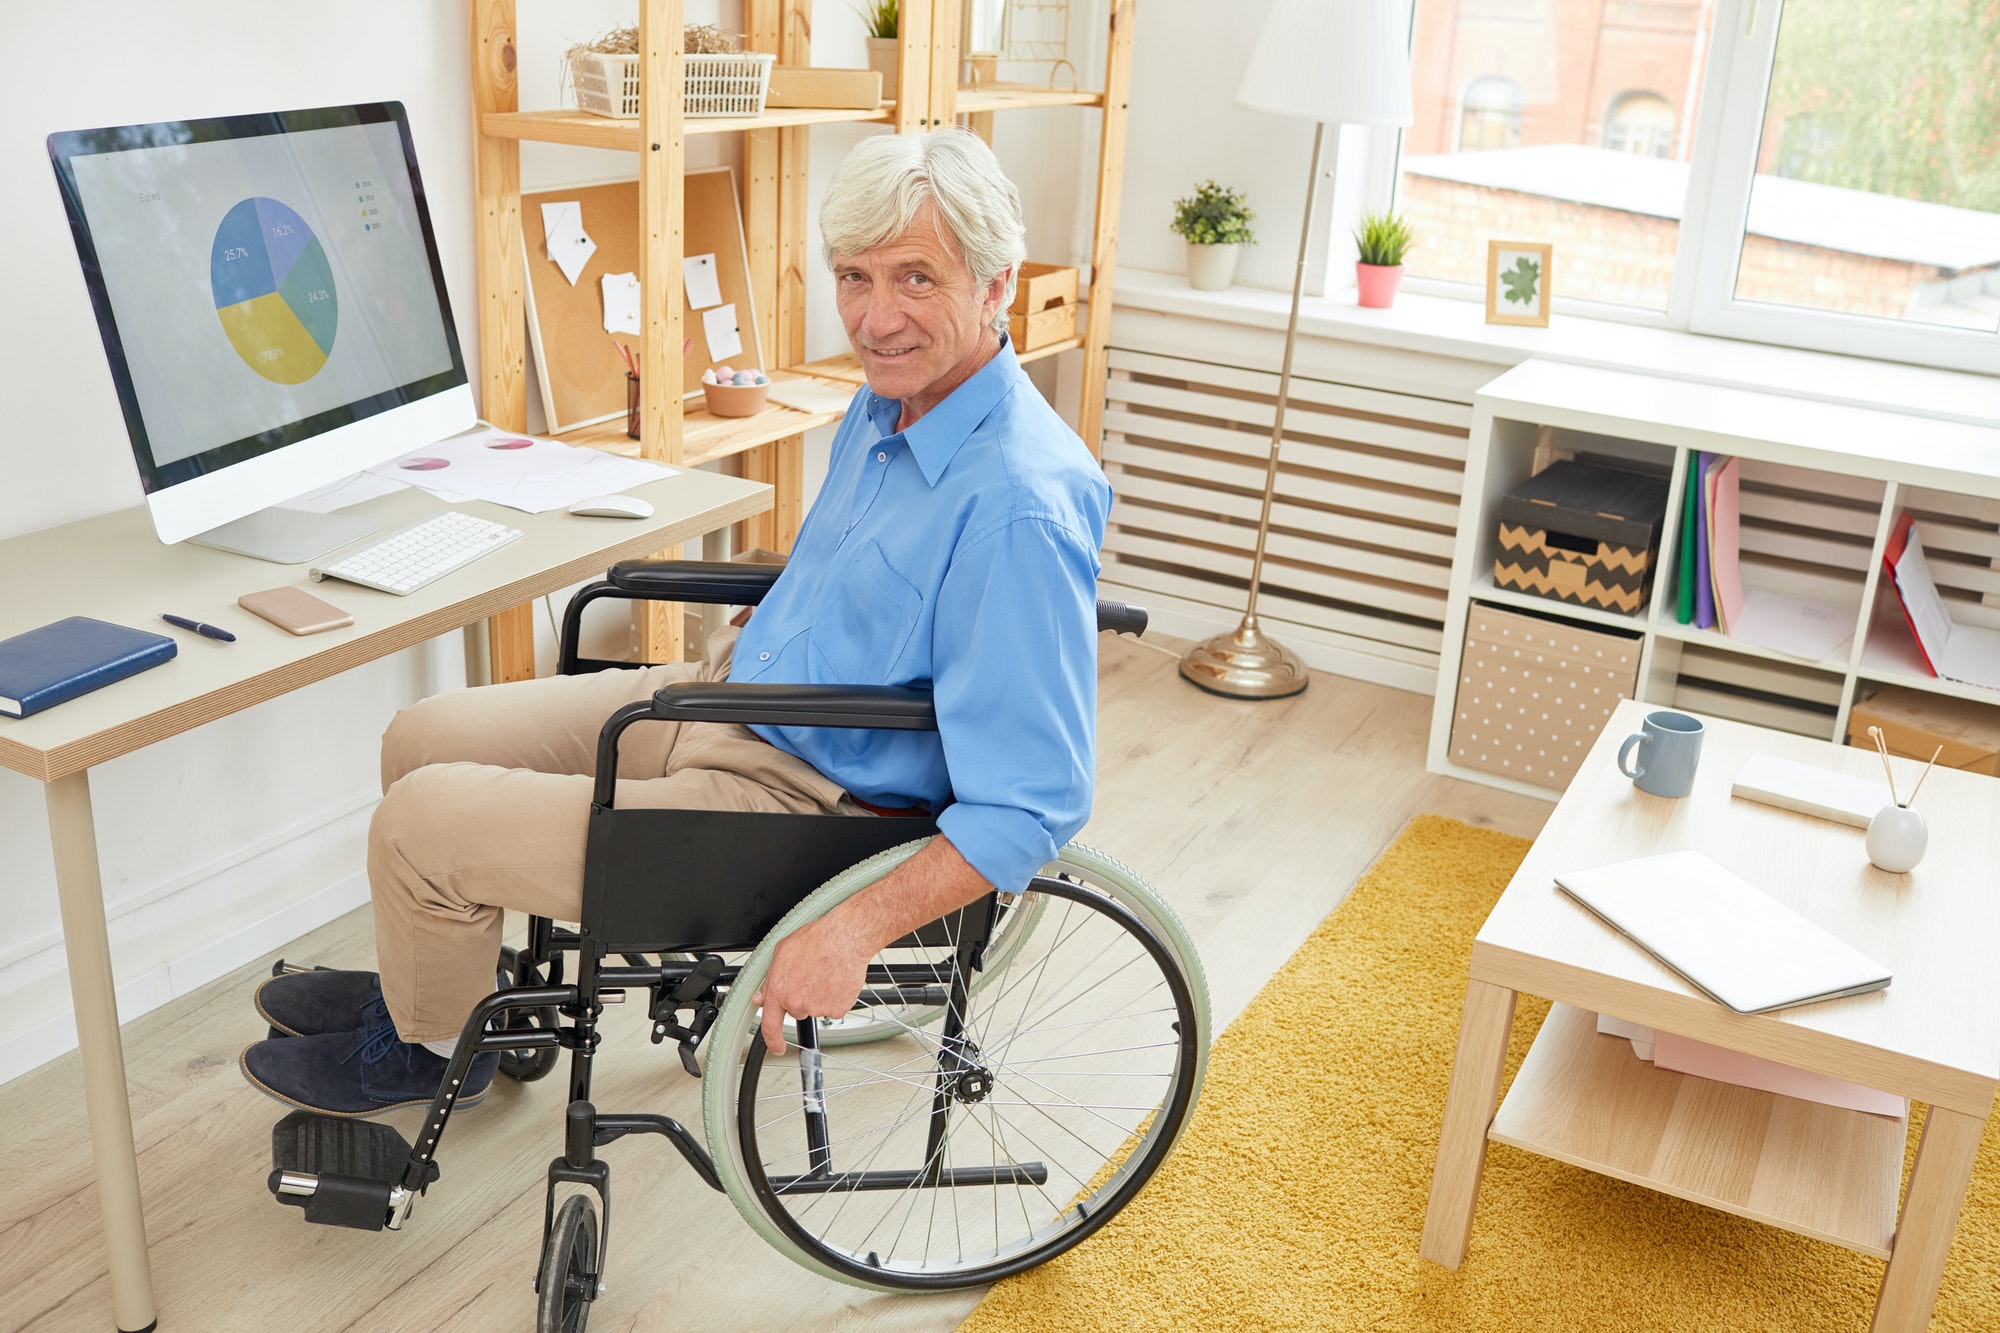 Disabled man working with graphics